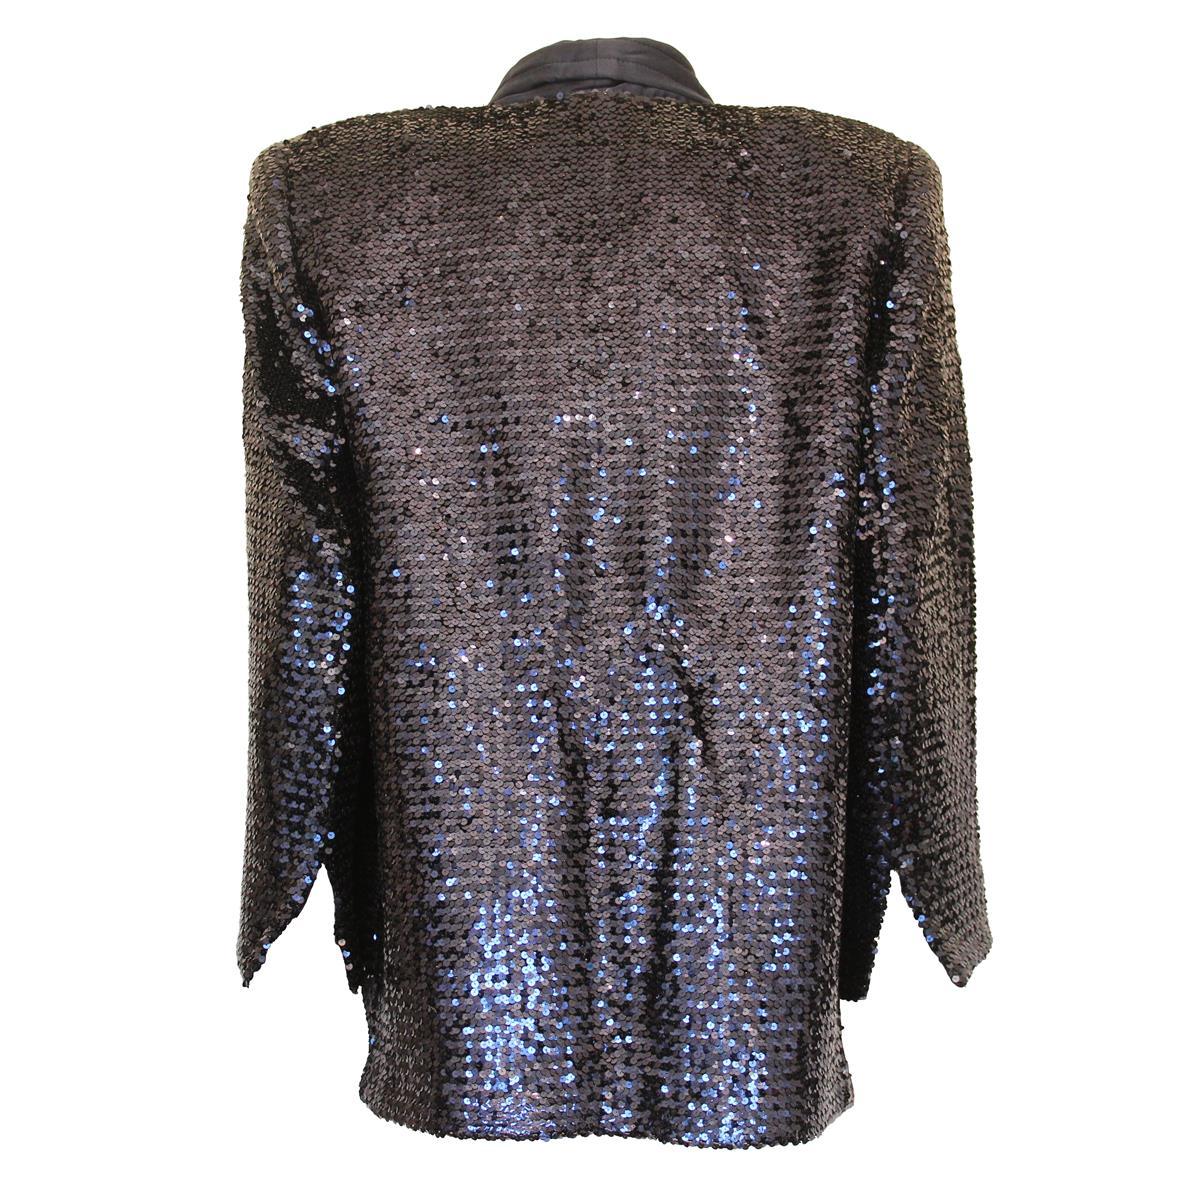 Vintage sequins jacket
Vintage
Sequins
Blue color
Satin revers
Two pockets
Length from shoulder cm 70 (27.5 inches)
Shoulders cm 45 (17.7 inches)
Worldwide express shipping included in the price !